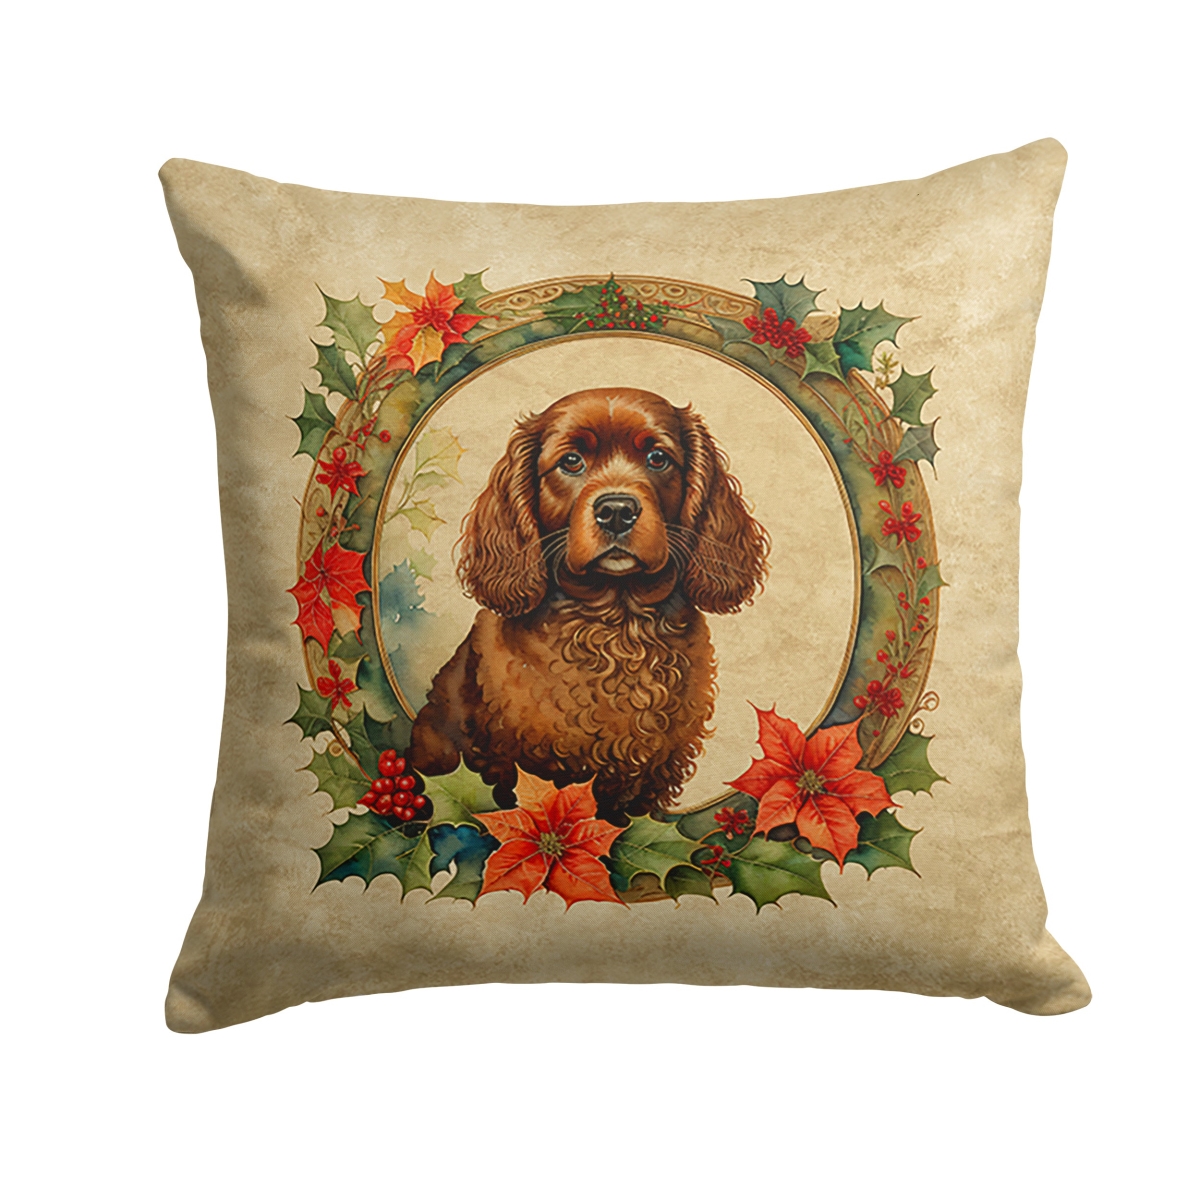 Caroline's Treasures DAC2304PW1414 14 x 14 in. Unisex American Water Spaniel Christmas Flowers Polyester Fabric Throw Pillow